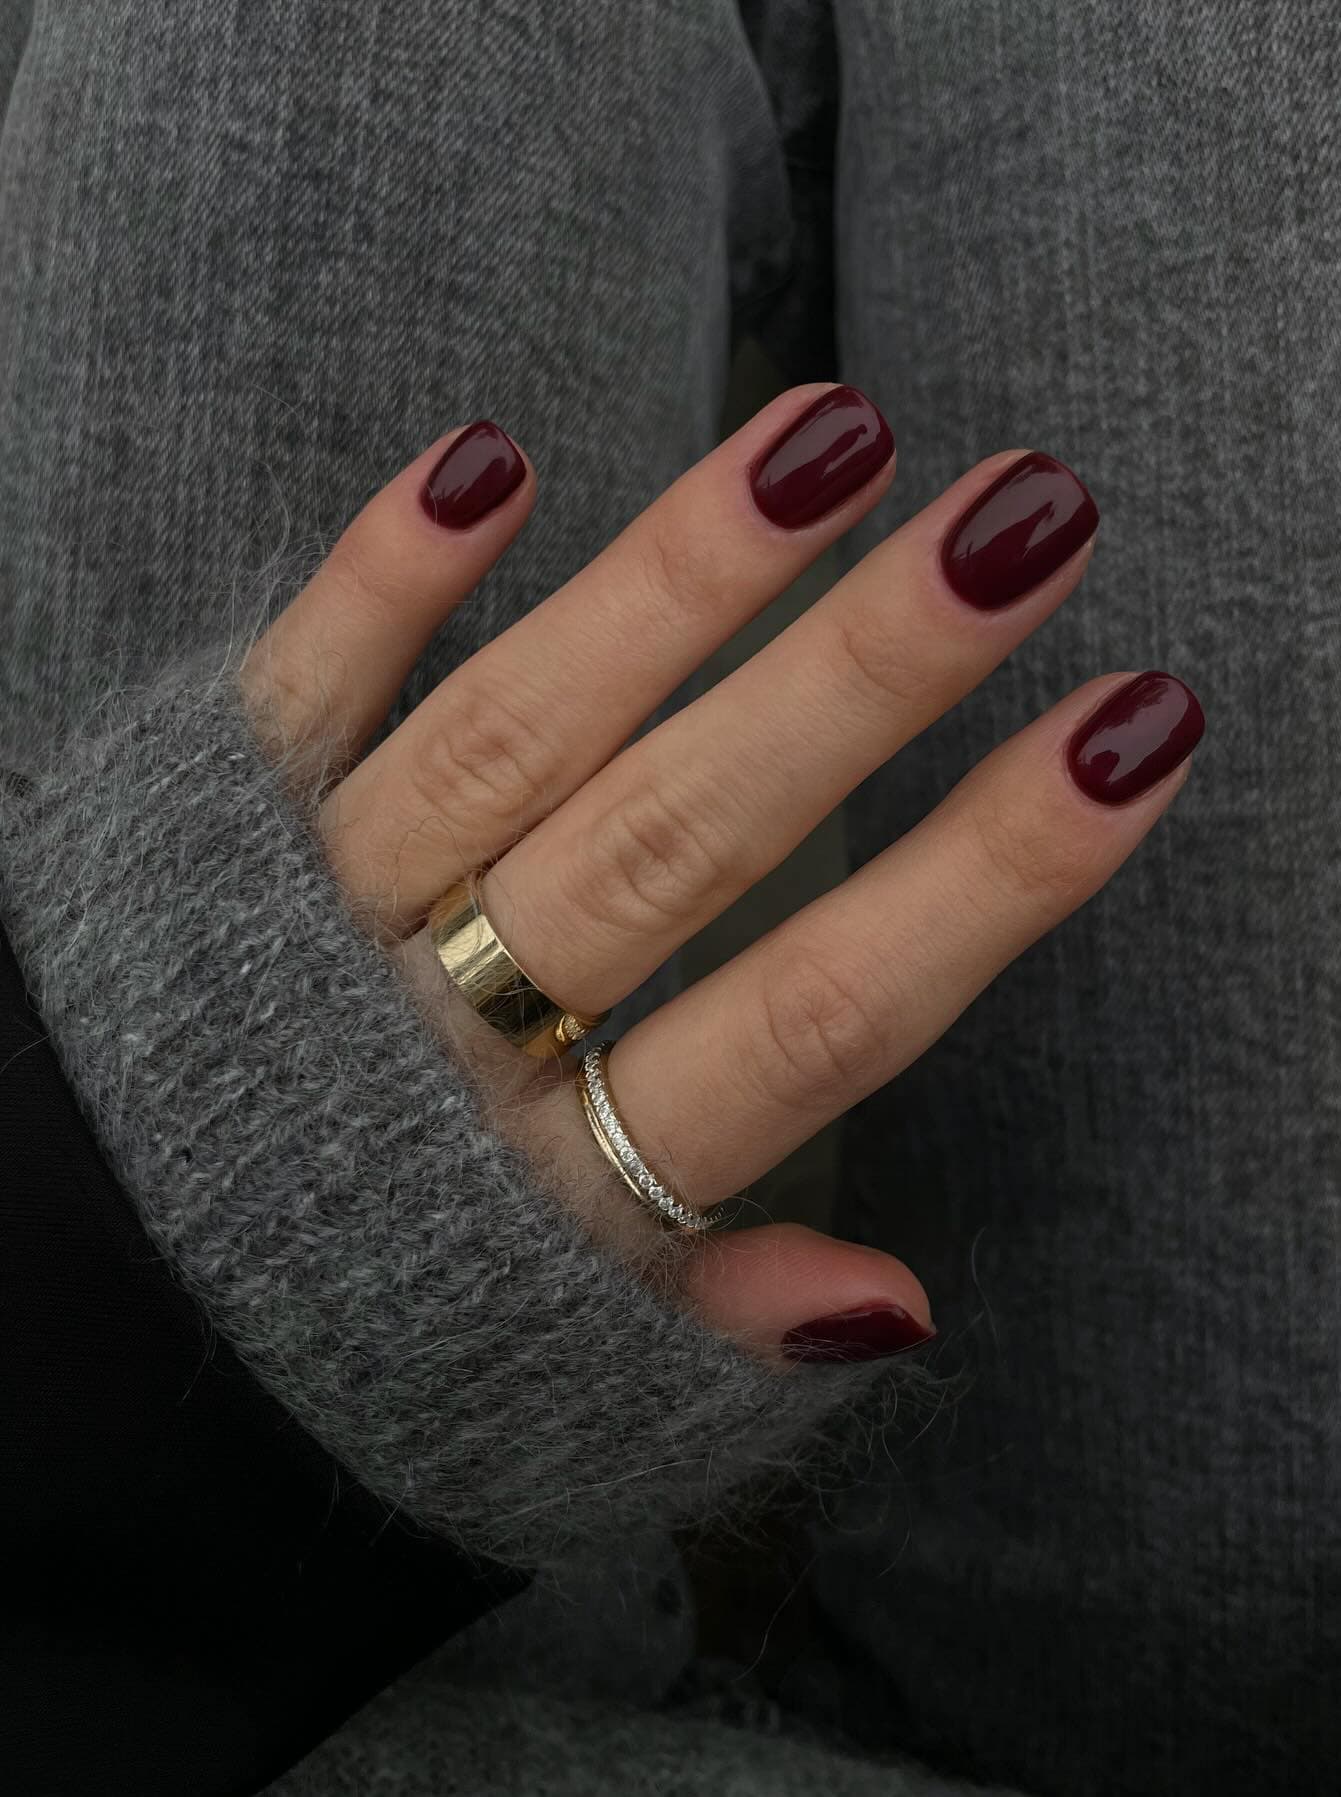 A hand with short squoval nails painted a burgundy red